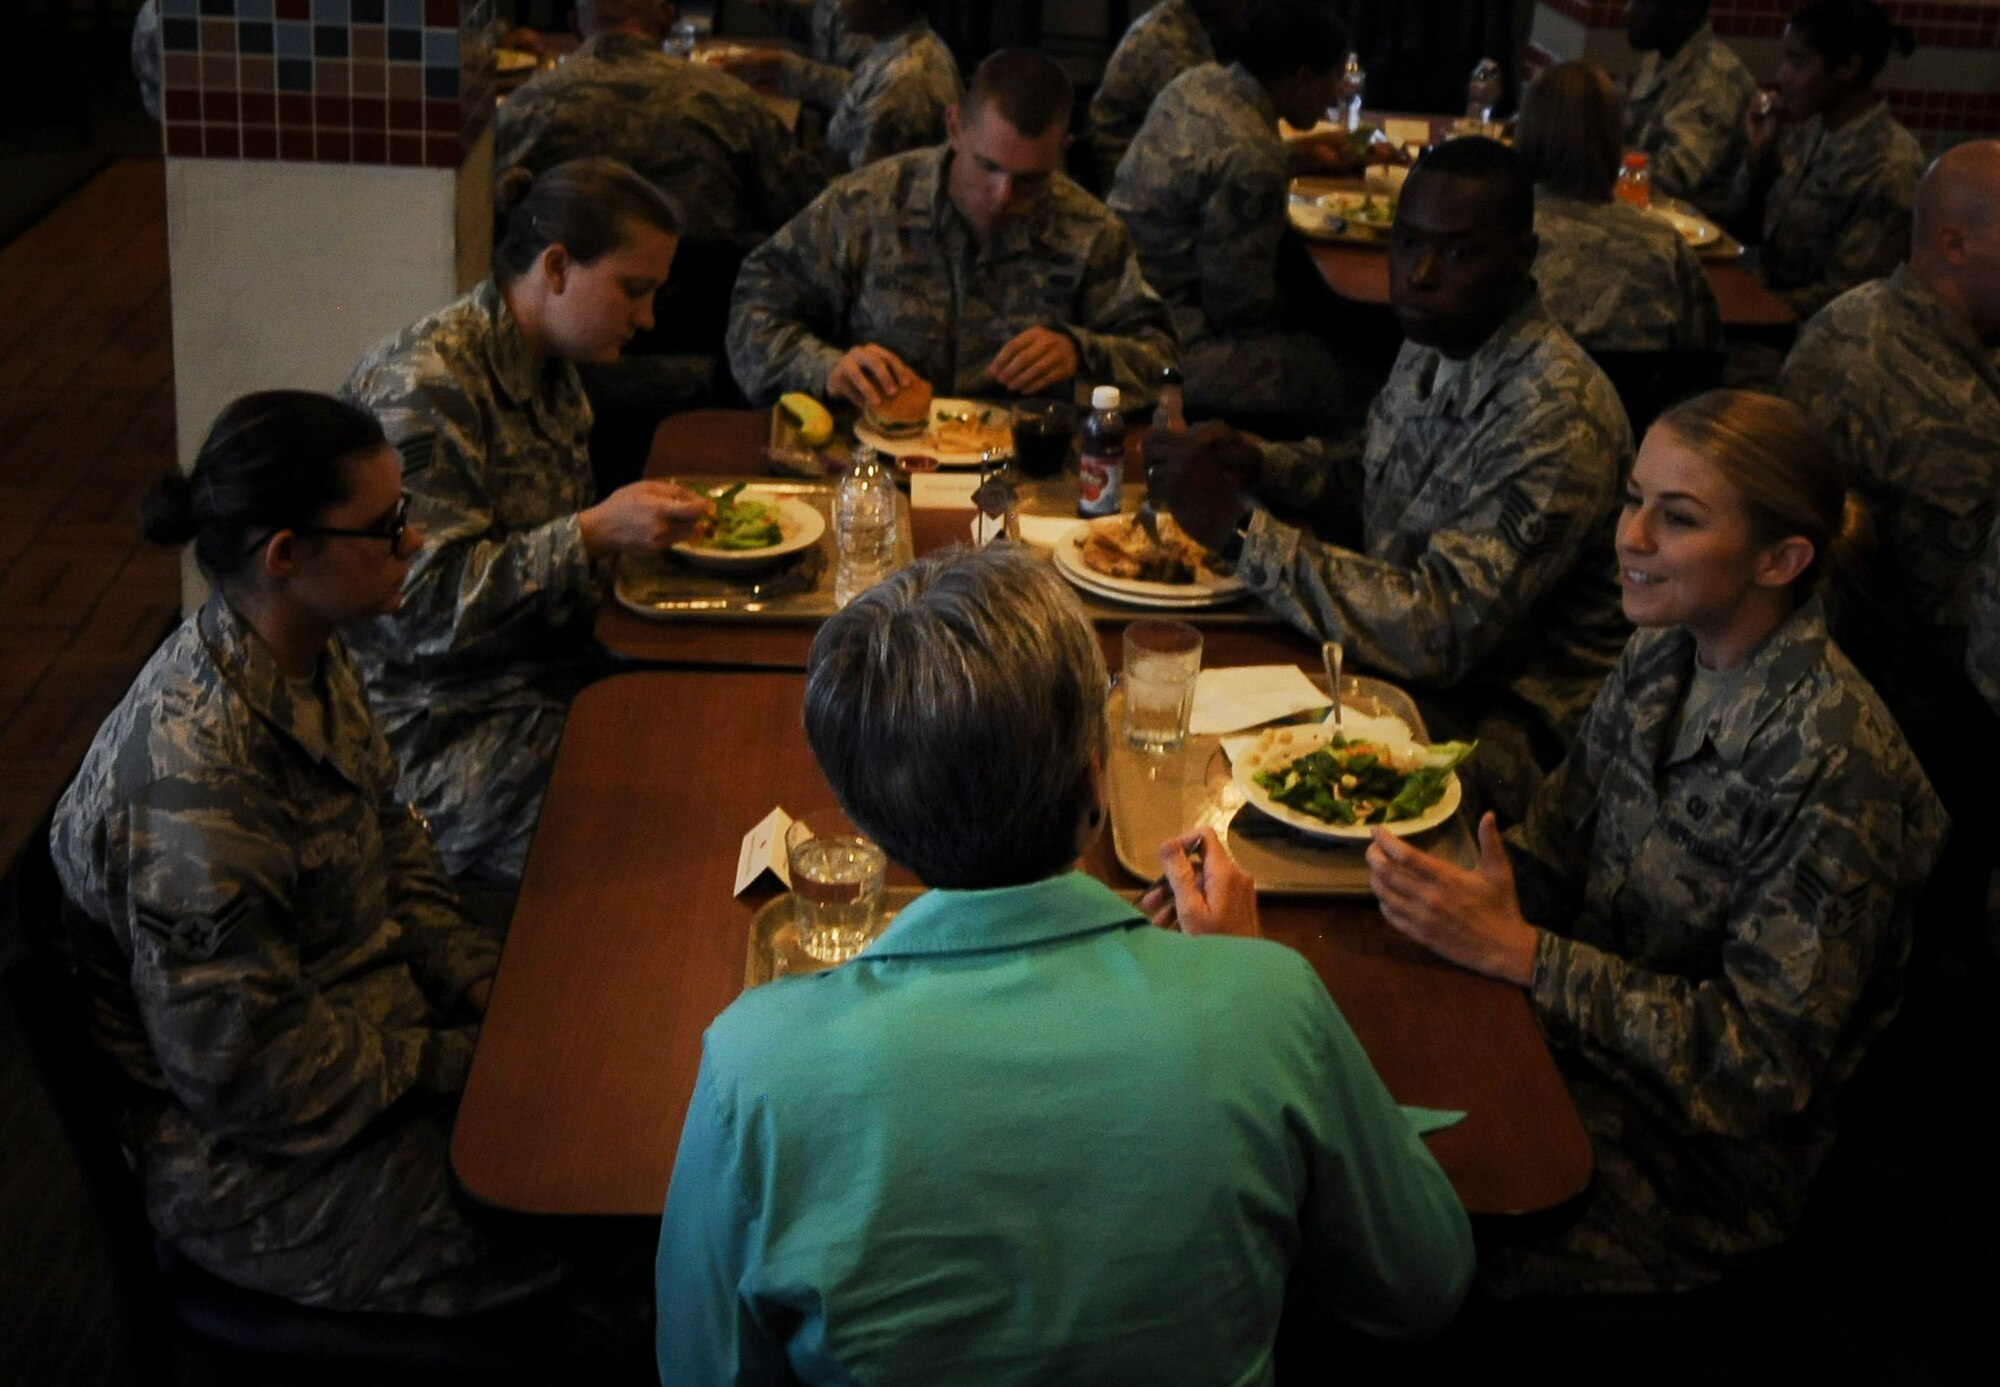 Secretary of the Air Force Heather Wilson shares a lunch with Airmen at the Crosswinds Dining Facility at Nellis Air Force Base, Nevada, July 18, 2017. Wilson visited Nellis and Creech Air Force bases July 17 to 21 and learned more about their operational experiences. (U.S. Air Force photo by Senior Airman Kevin Tanenbaum)